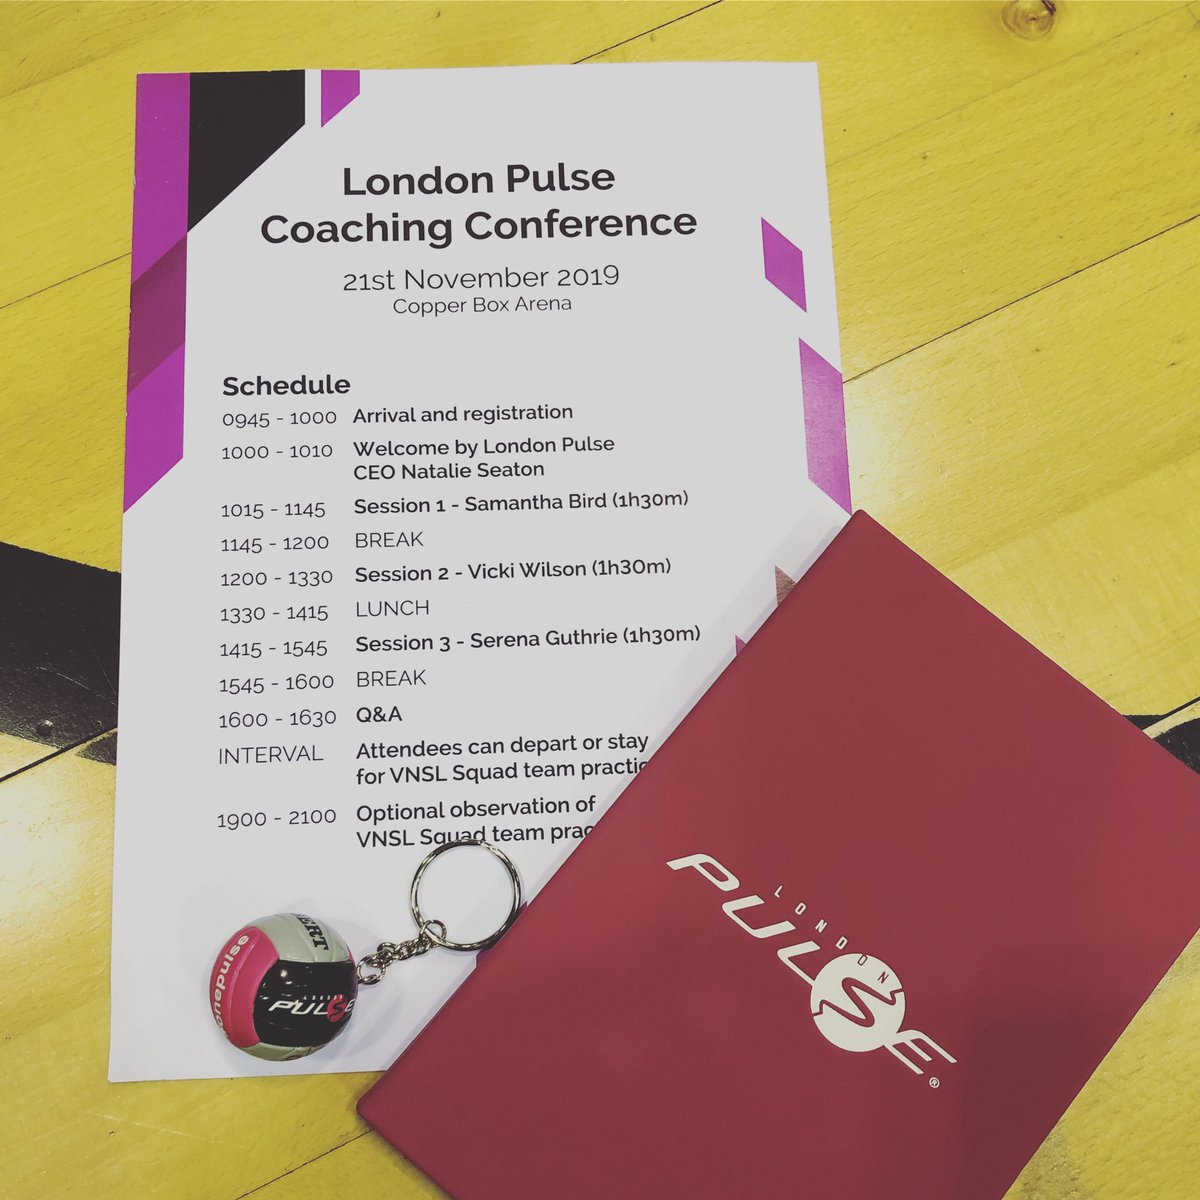 #alwayslearning #alwaysdeveloping 
Our Head Coaches @coach1lb and @Rowena_83 attended the @Pulse_Netball Coaching Conference 💓🖤

Looking forward to bringing this good stuff back into club training! 
#youth #netball #stayhungry #keepgrowing #proudtobepulse #chasetheace